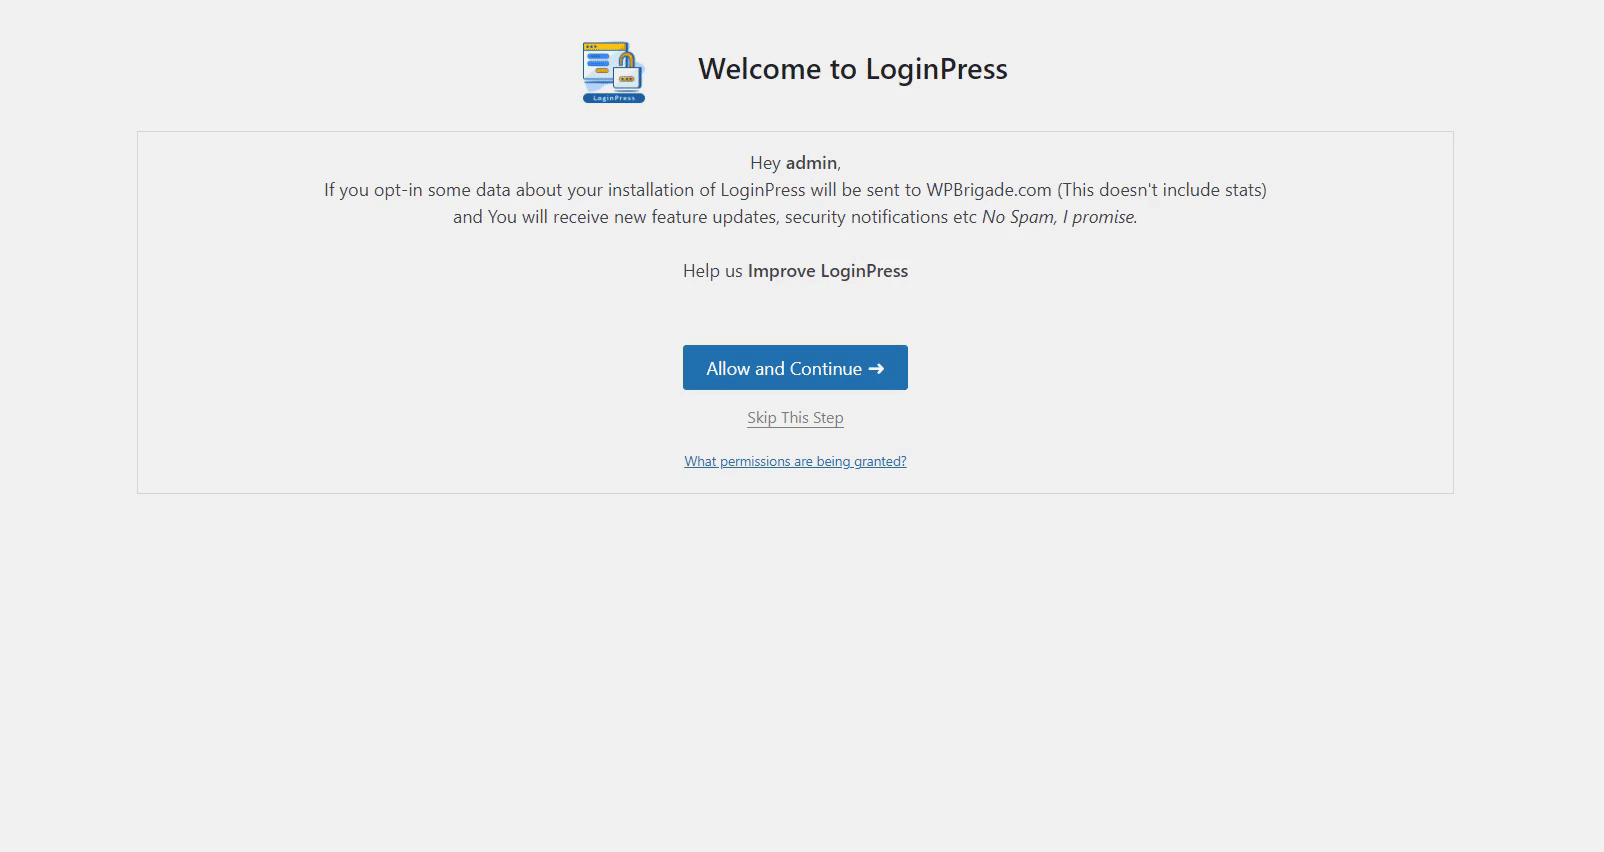 welcome to LoginPress